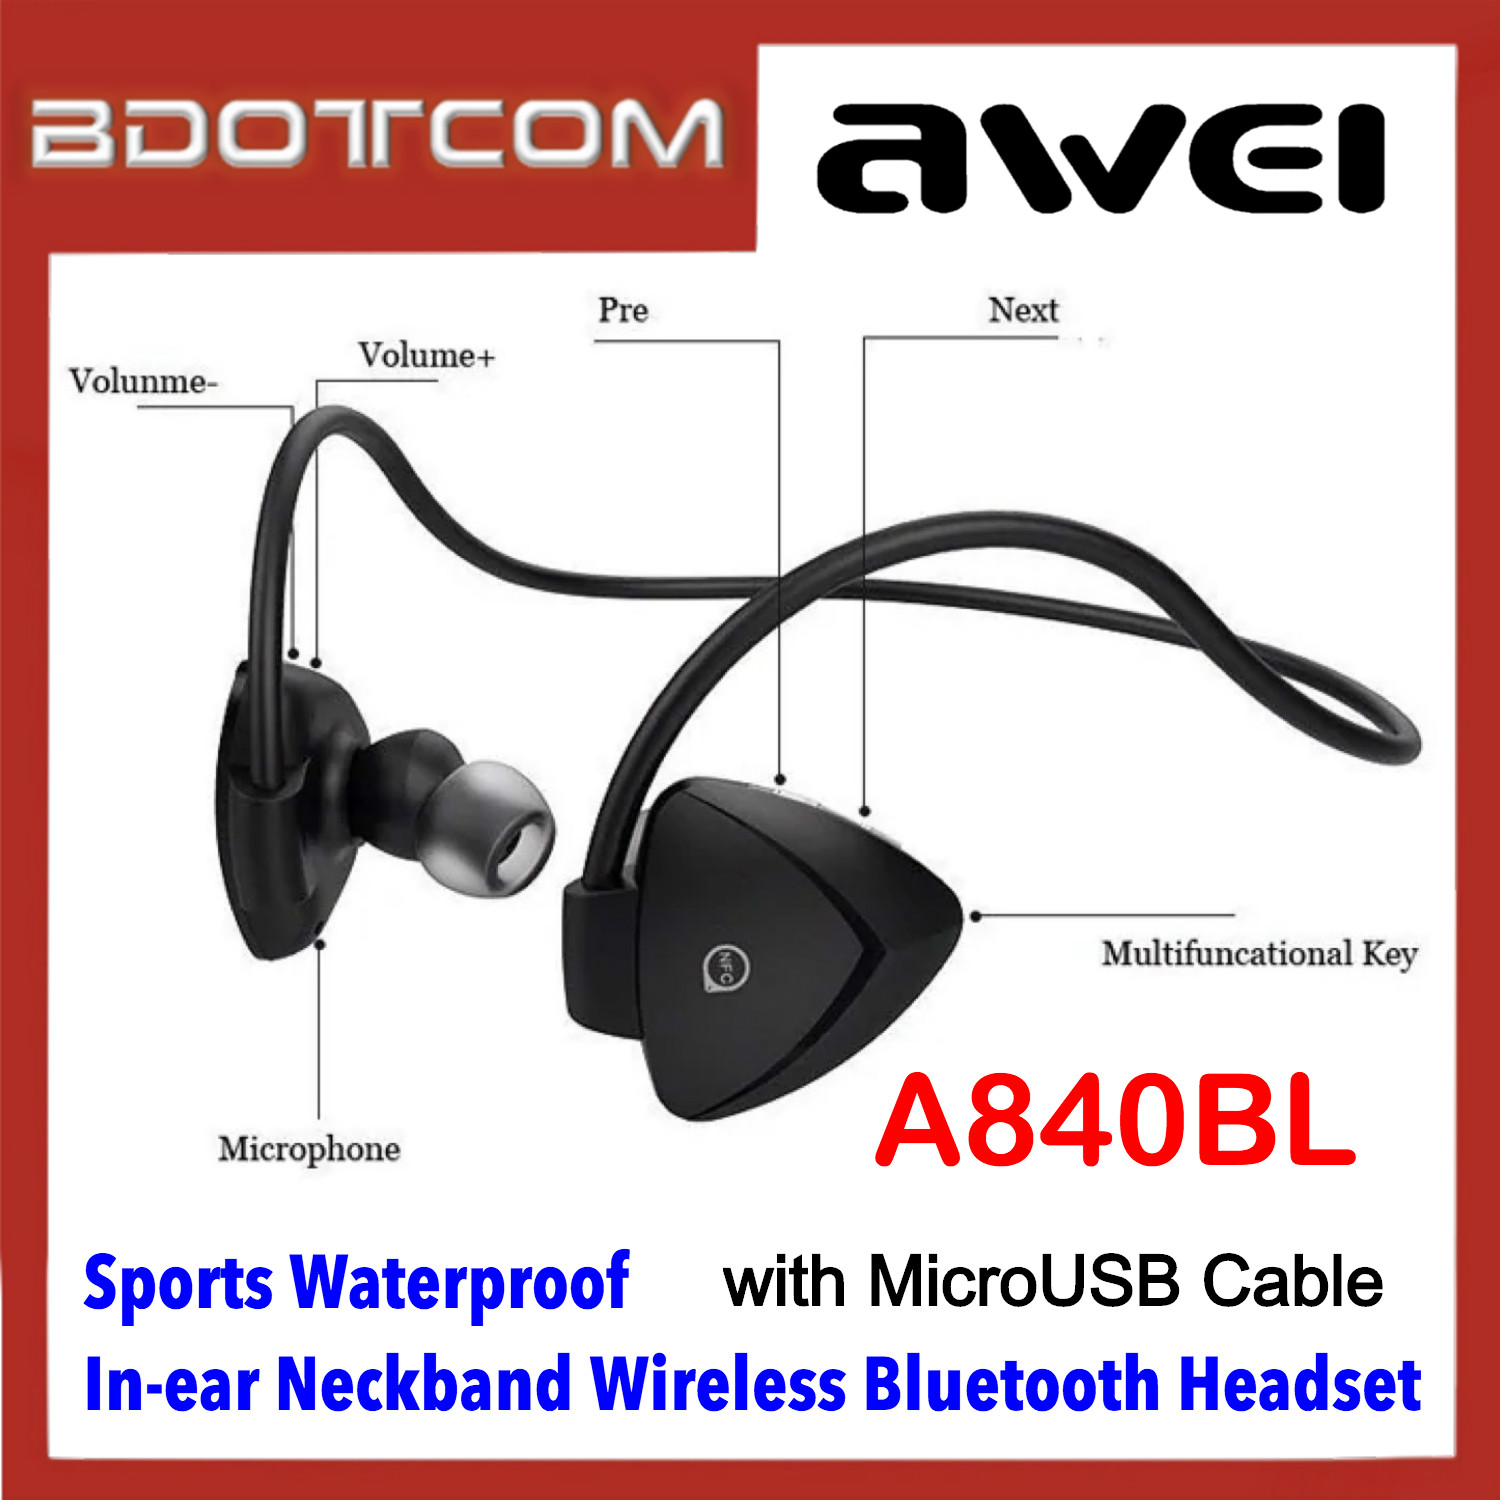 Stout Heel resterend Buy Bdotcom Awei A840BL Smart Sports Waterproof In-ear Neckband Wireless  Bluetooth Headset with MicroUSB Cable Online | eRomman